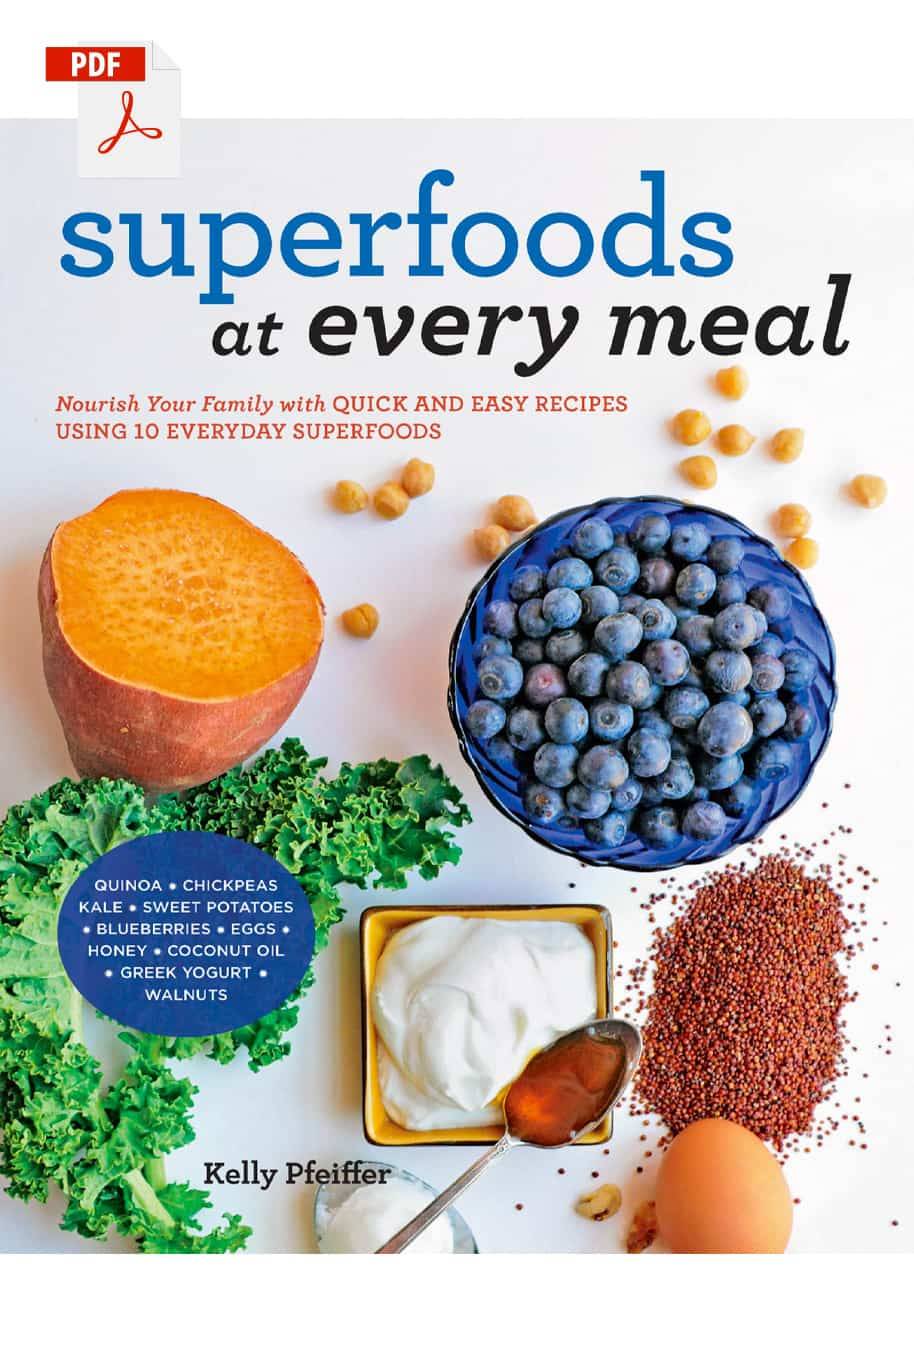 Superfoods at every Meal - 179 pages